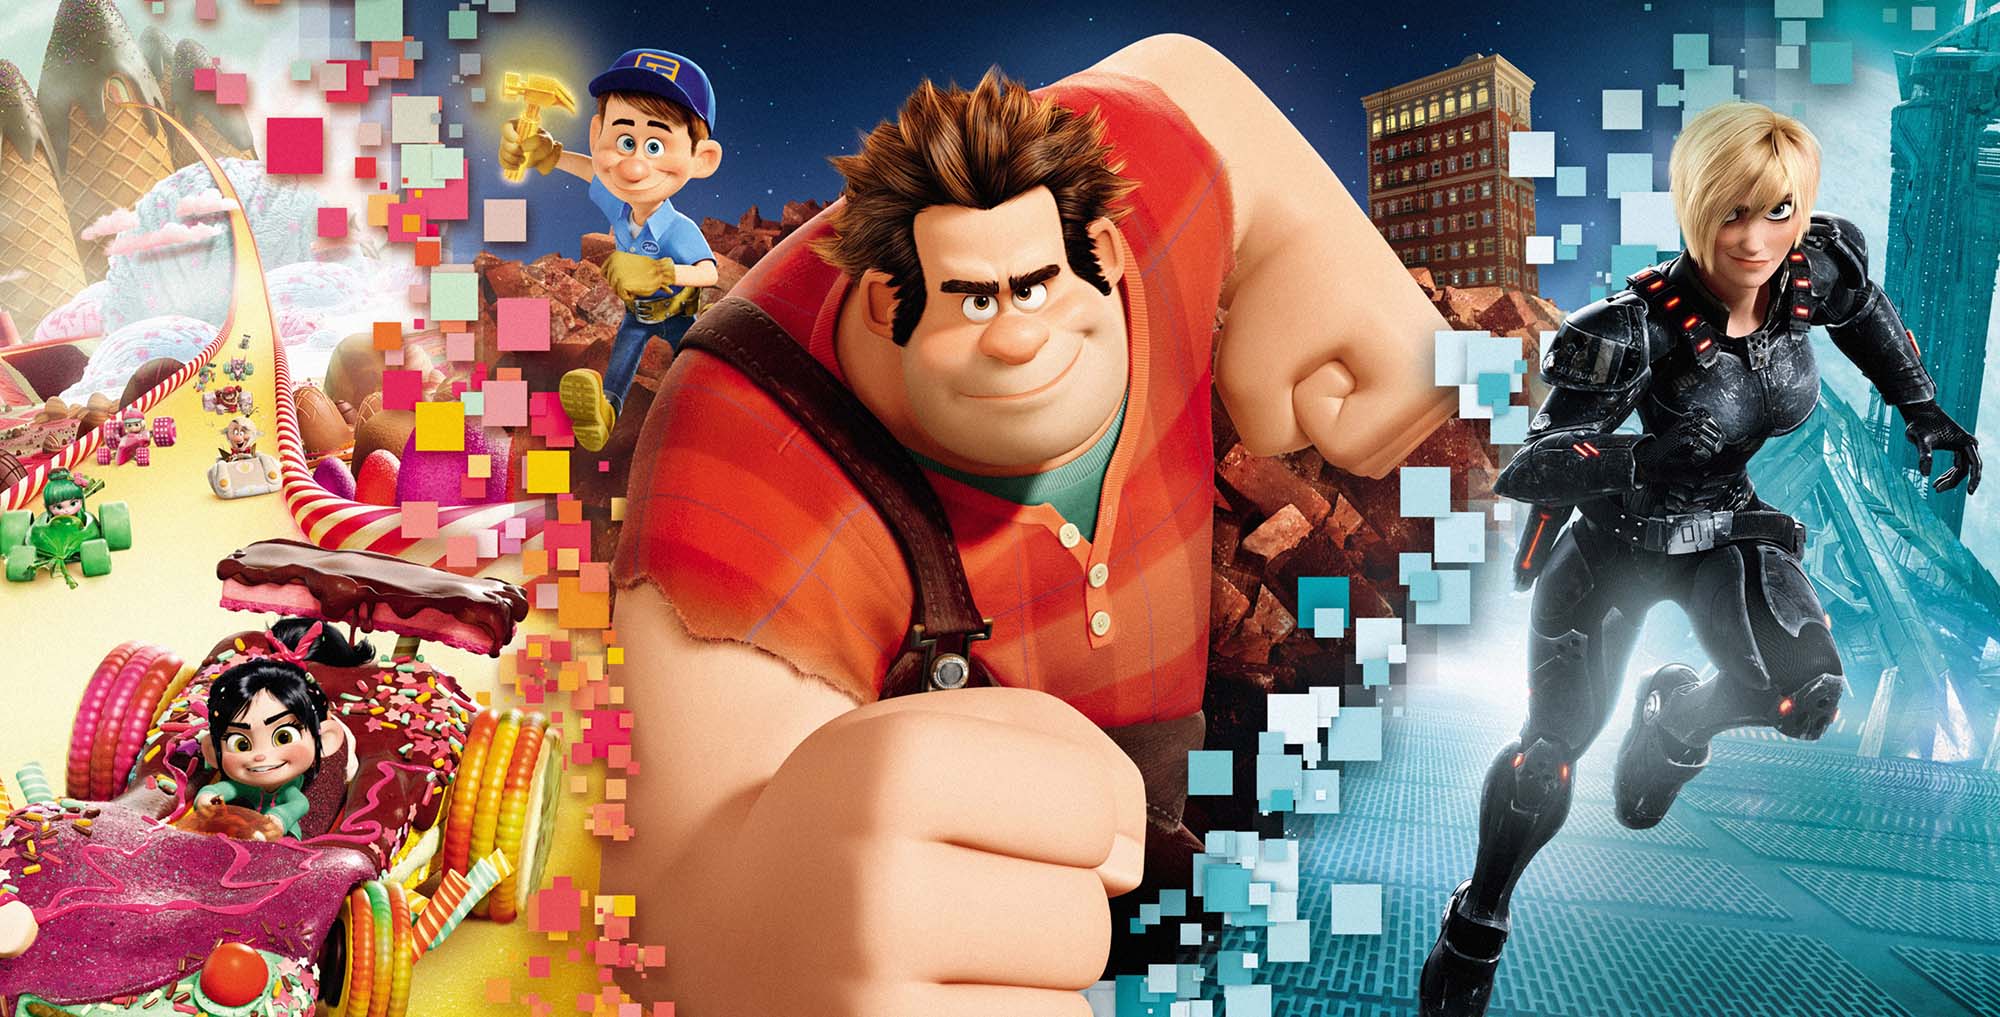 'Wreck-It Ralph' sequel 'Ralph Breaks the Internet' broke the internet with its trailer that took us to the magically bonkers world of the Disney princess.